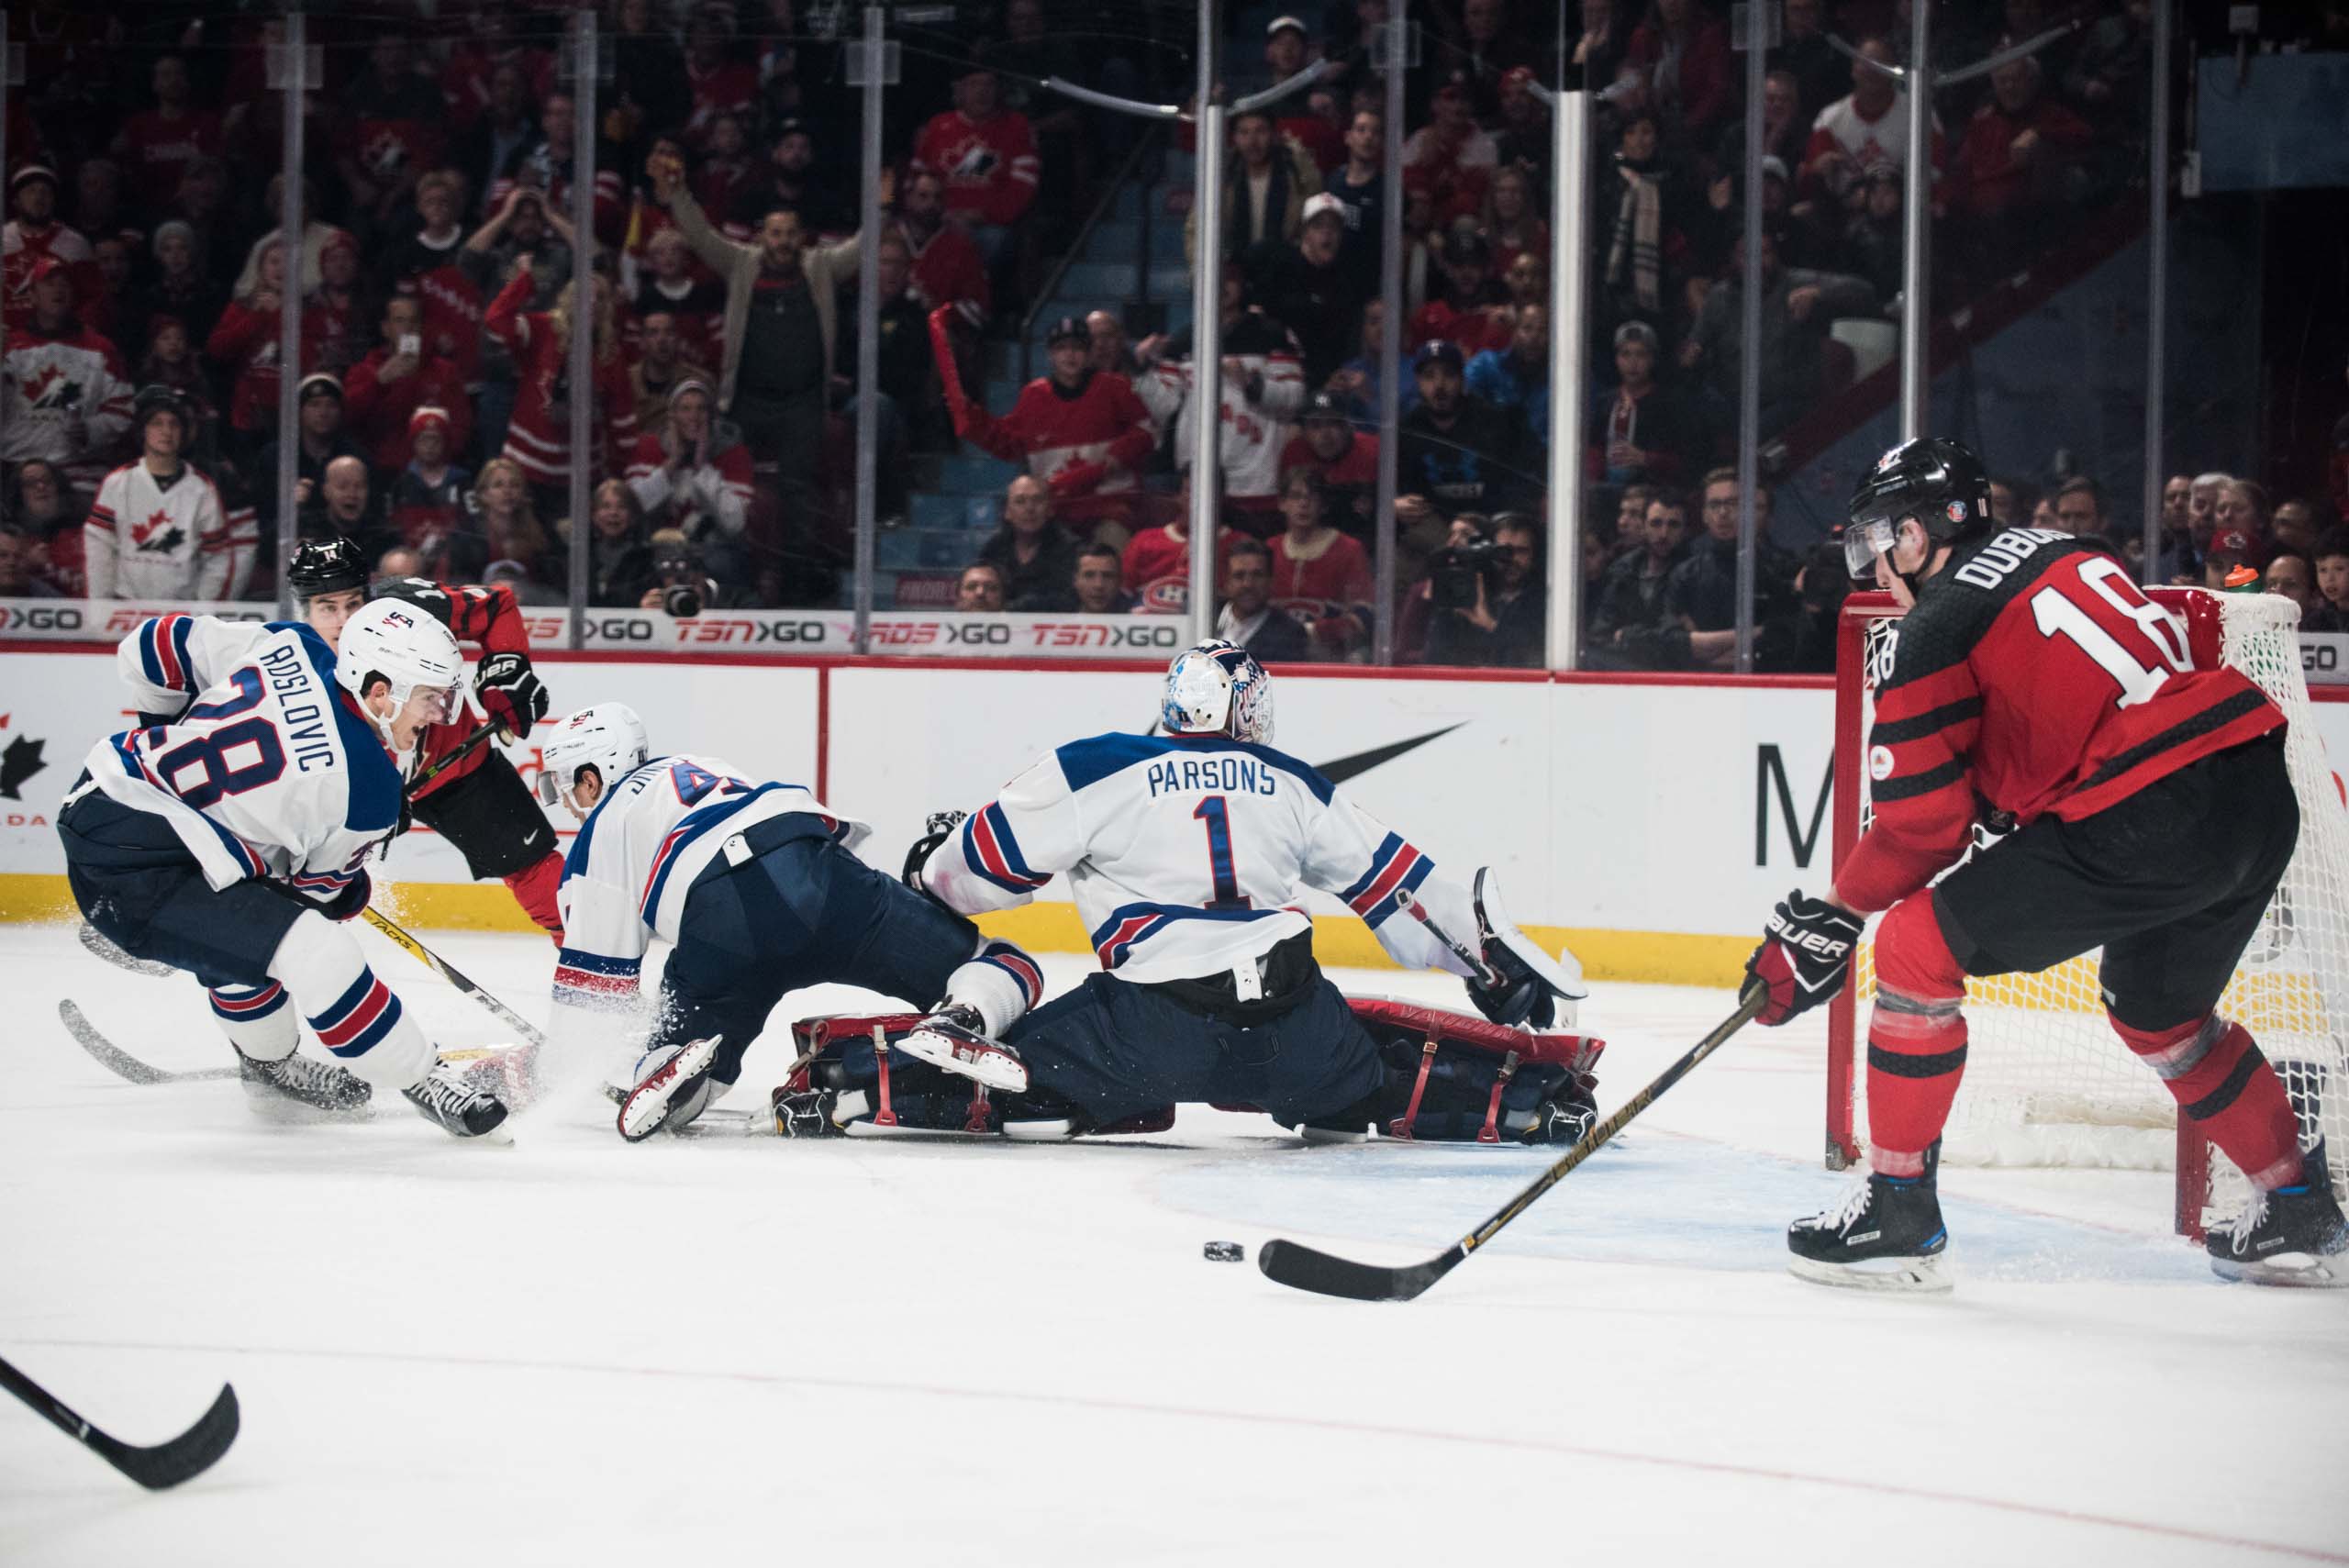 Late in the third period, Canada's Pierre-Luc Dubois had the game on his stick after a terrific pass from Matt Barzal, but he couldn't control it with a wide open net. (Photo by Julien Grimard) 